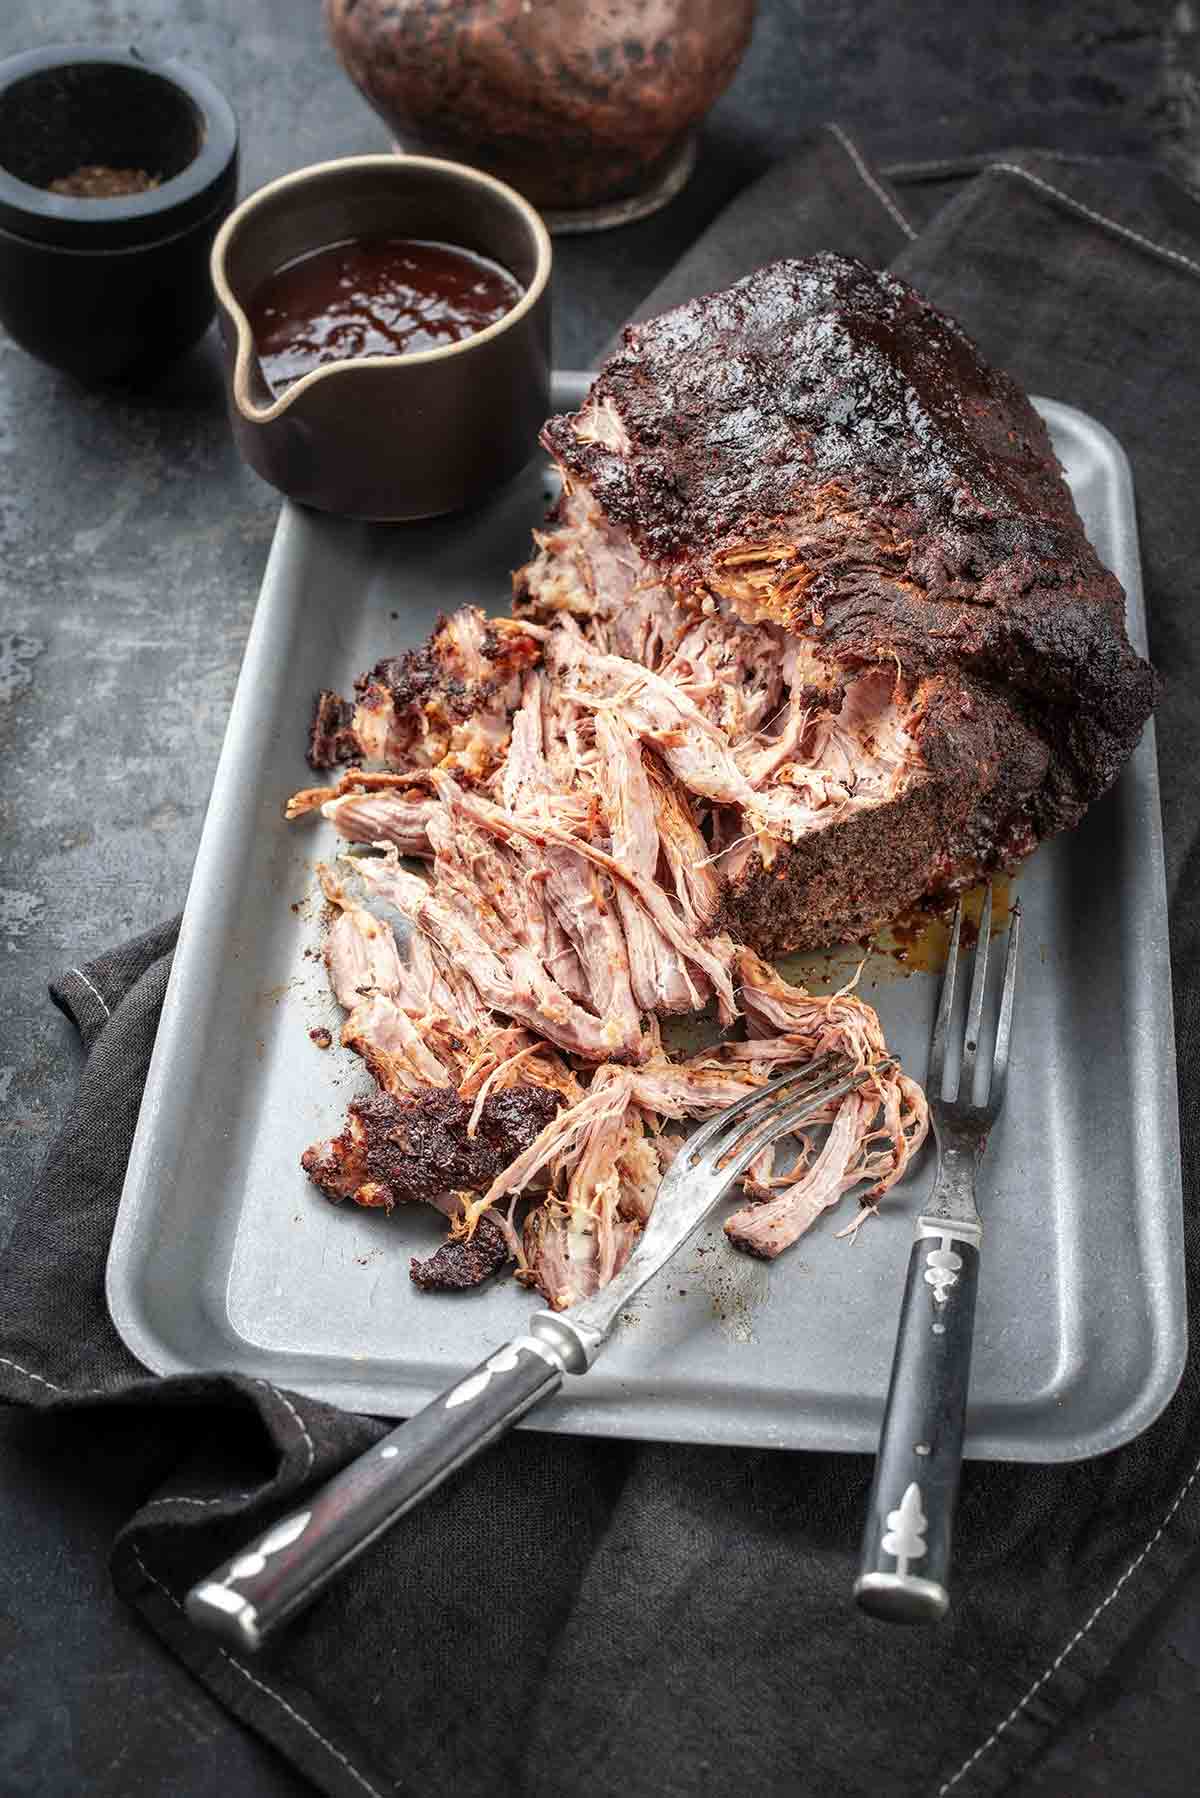 A partially shredded roast pork butt in a roasting pan with a cup of barbecue sauce and two forks.